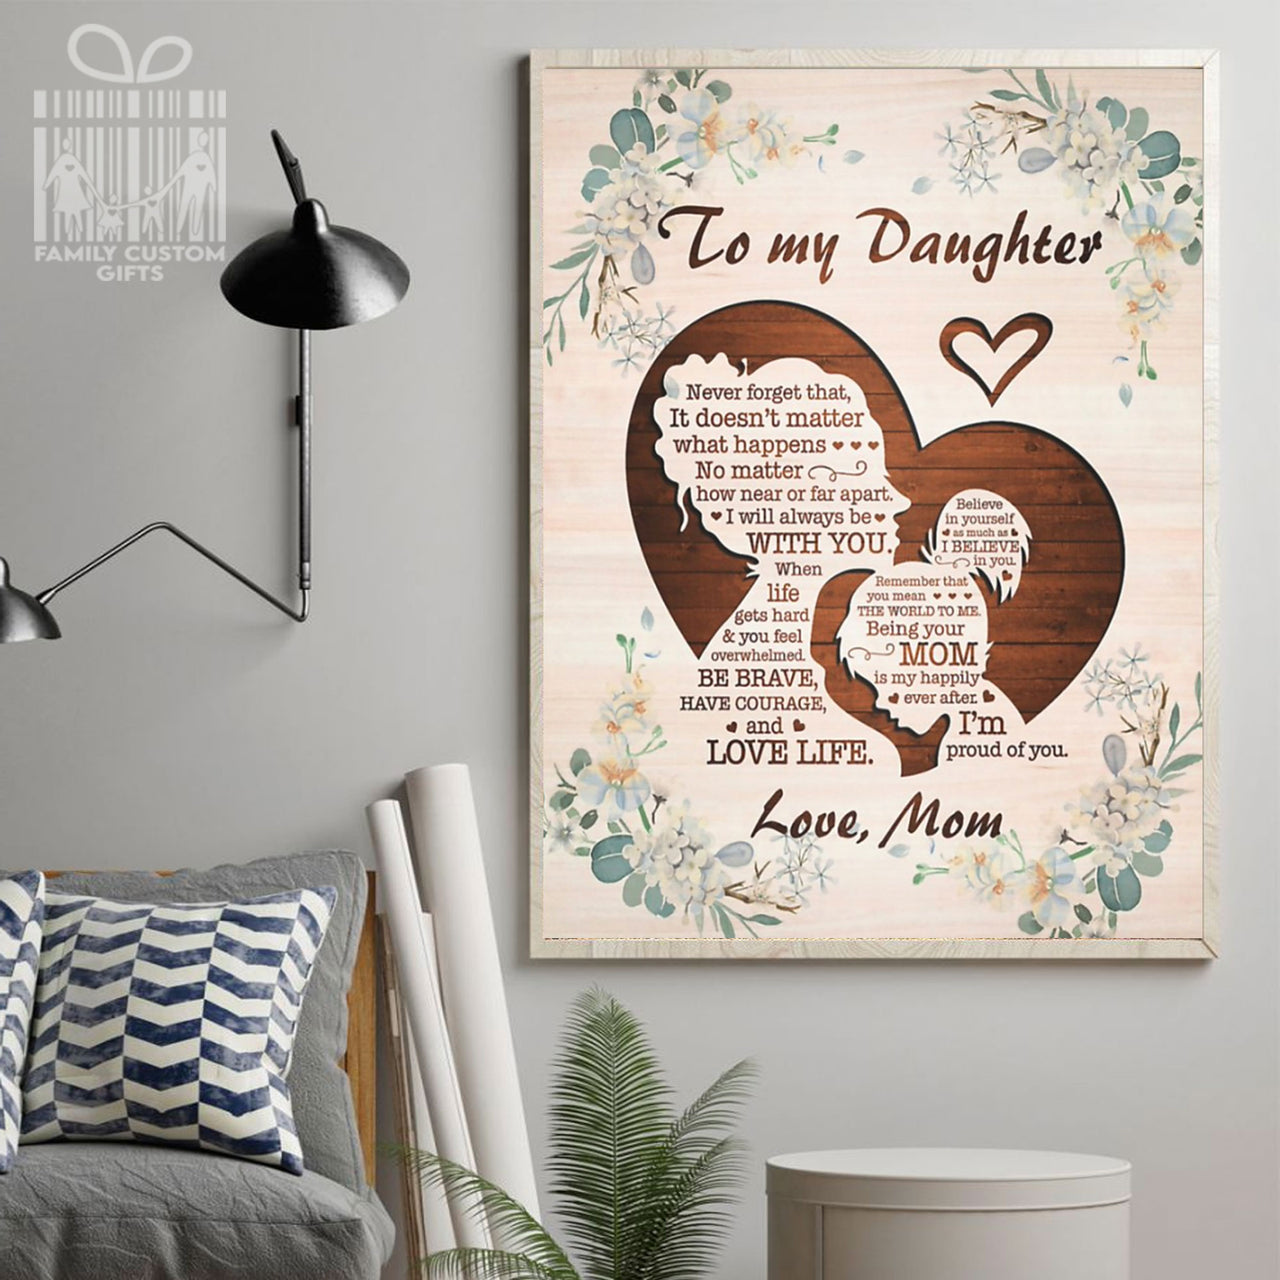 Custom Poster Prints To My Daughter from Mom Personalized Wall Art for Daughter - Premium Poster